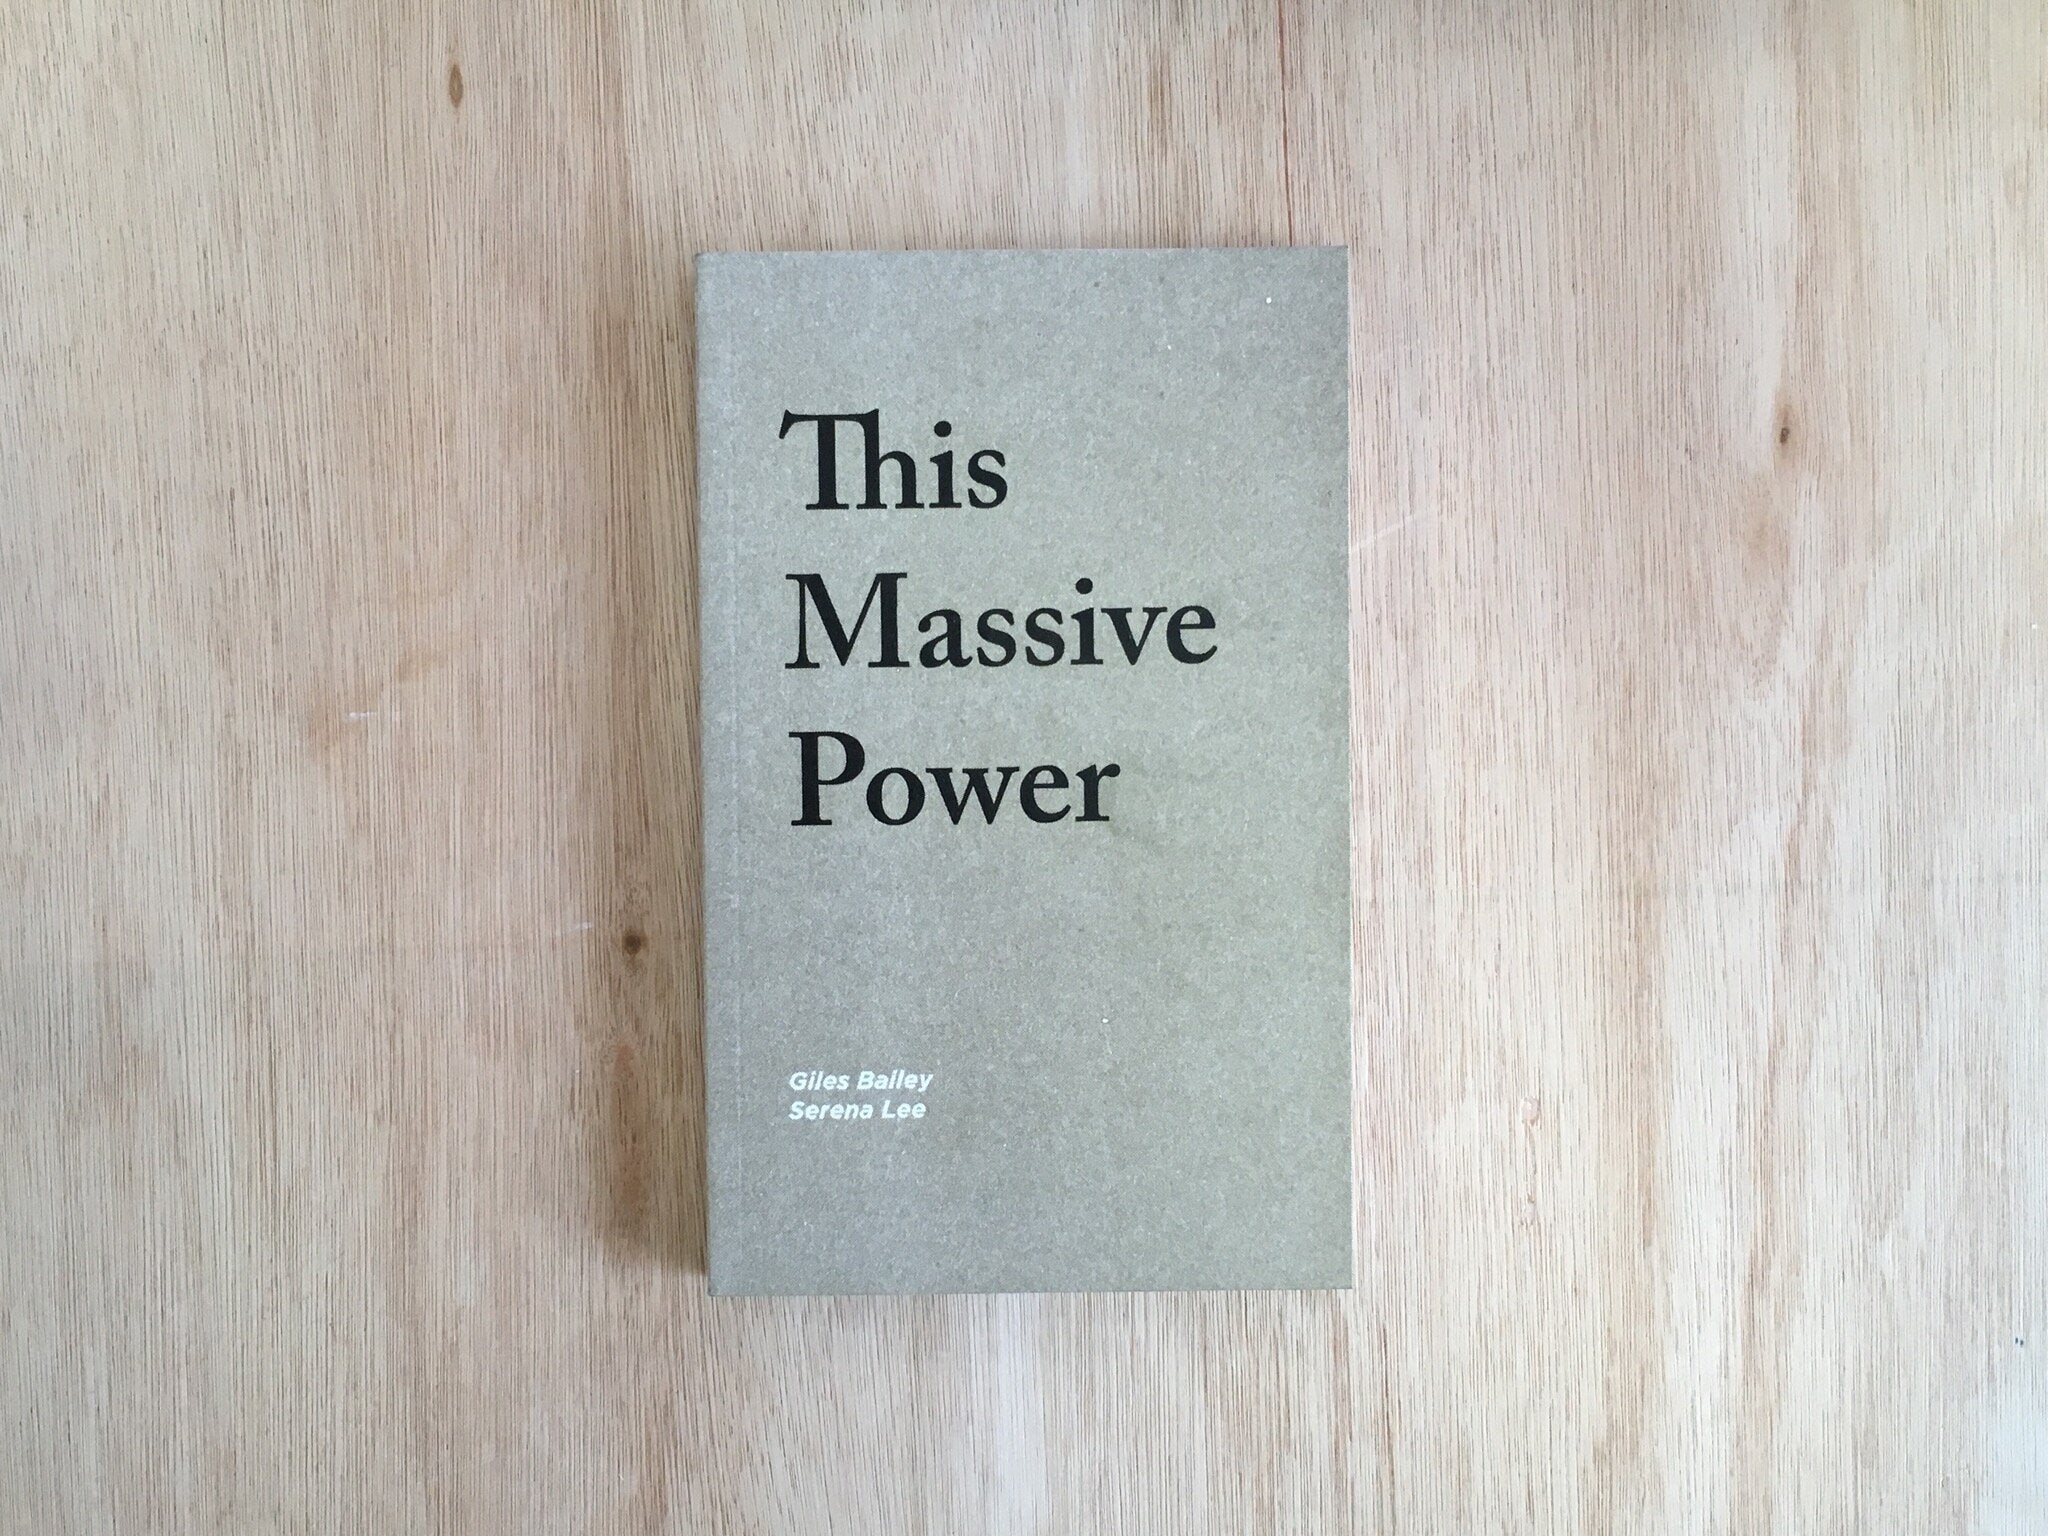 THIS MASSIVE POWER by Giles Bailey & Serena Lee